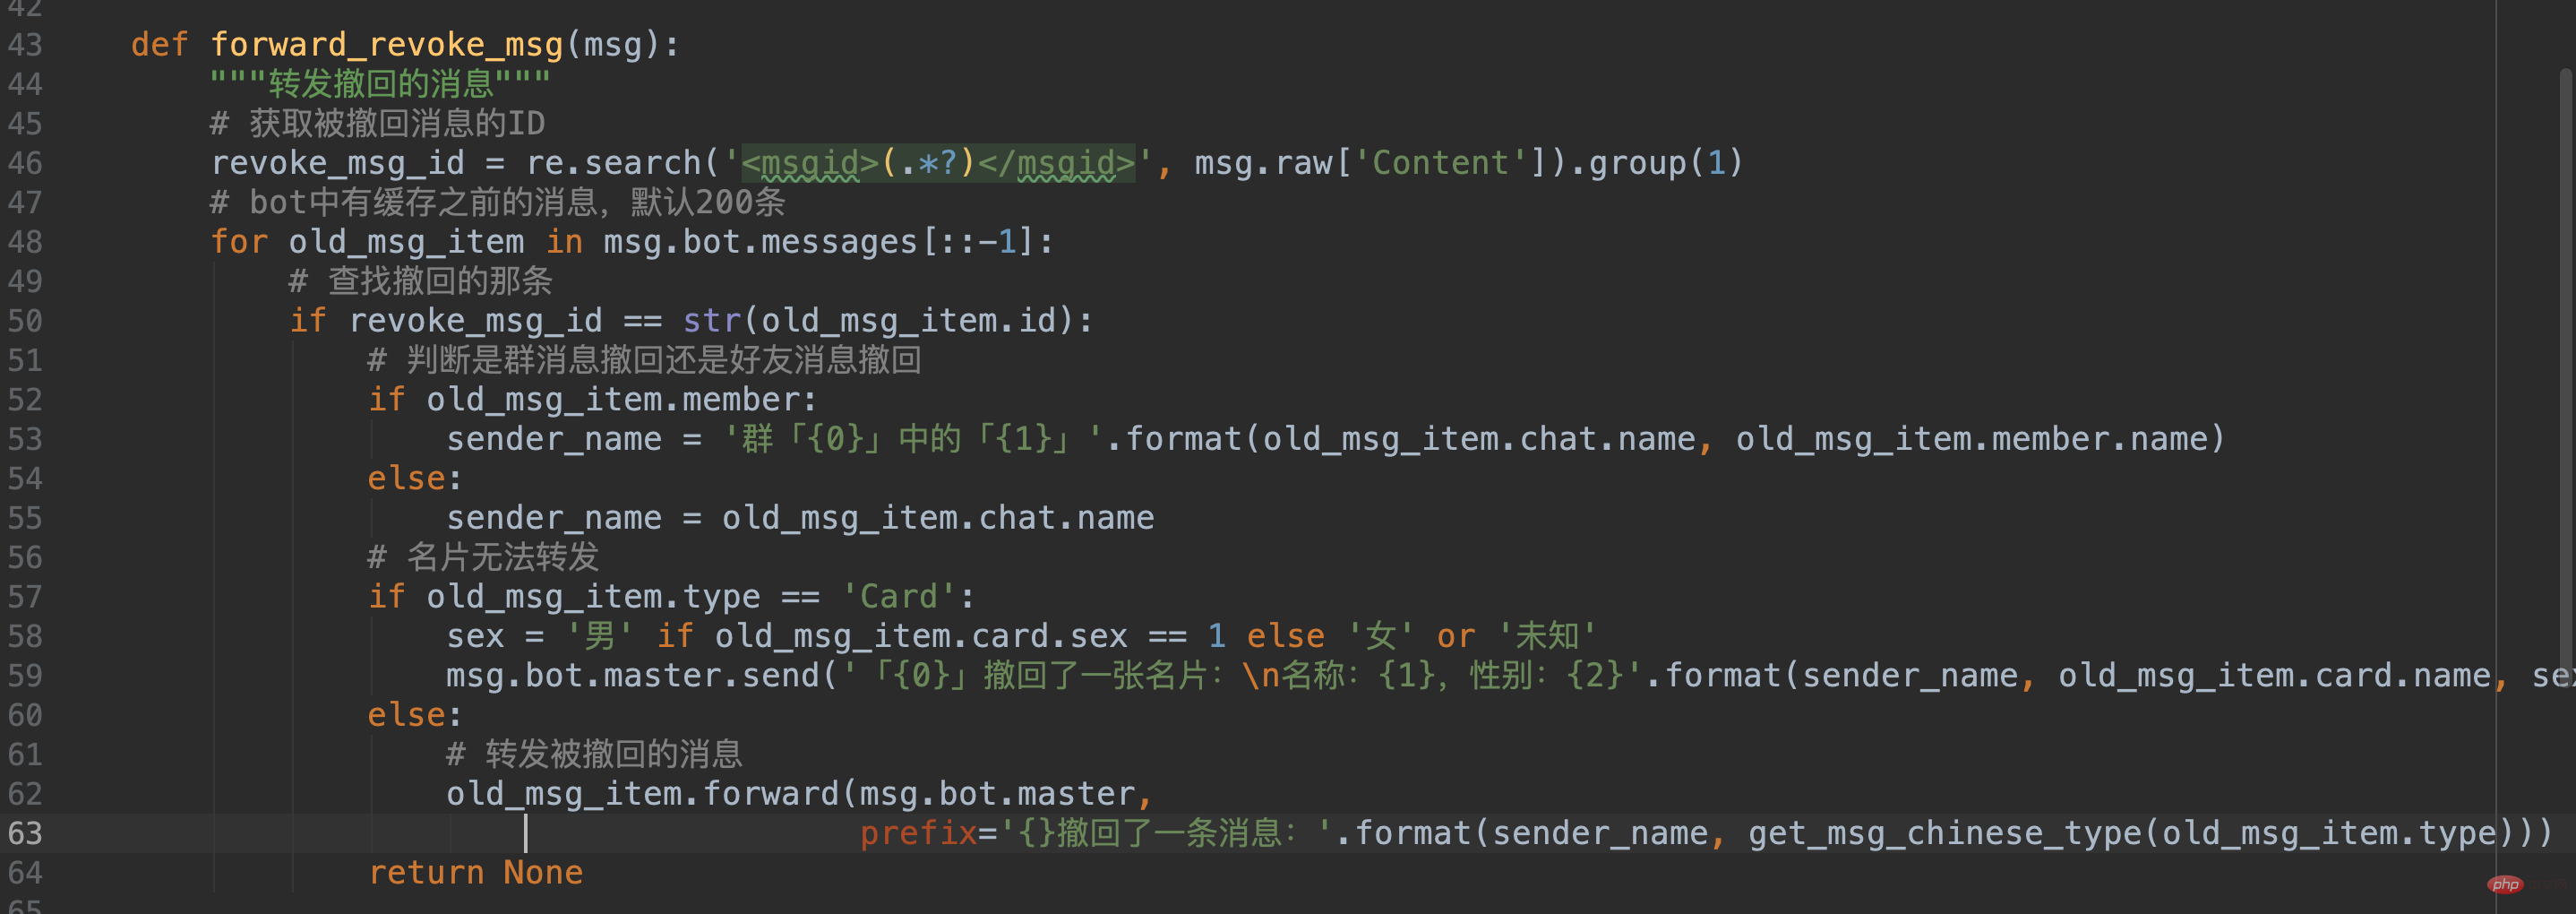 How to use Python to prevent withdrawal of WeChat messages